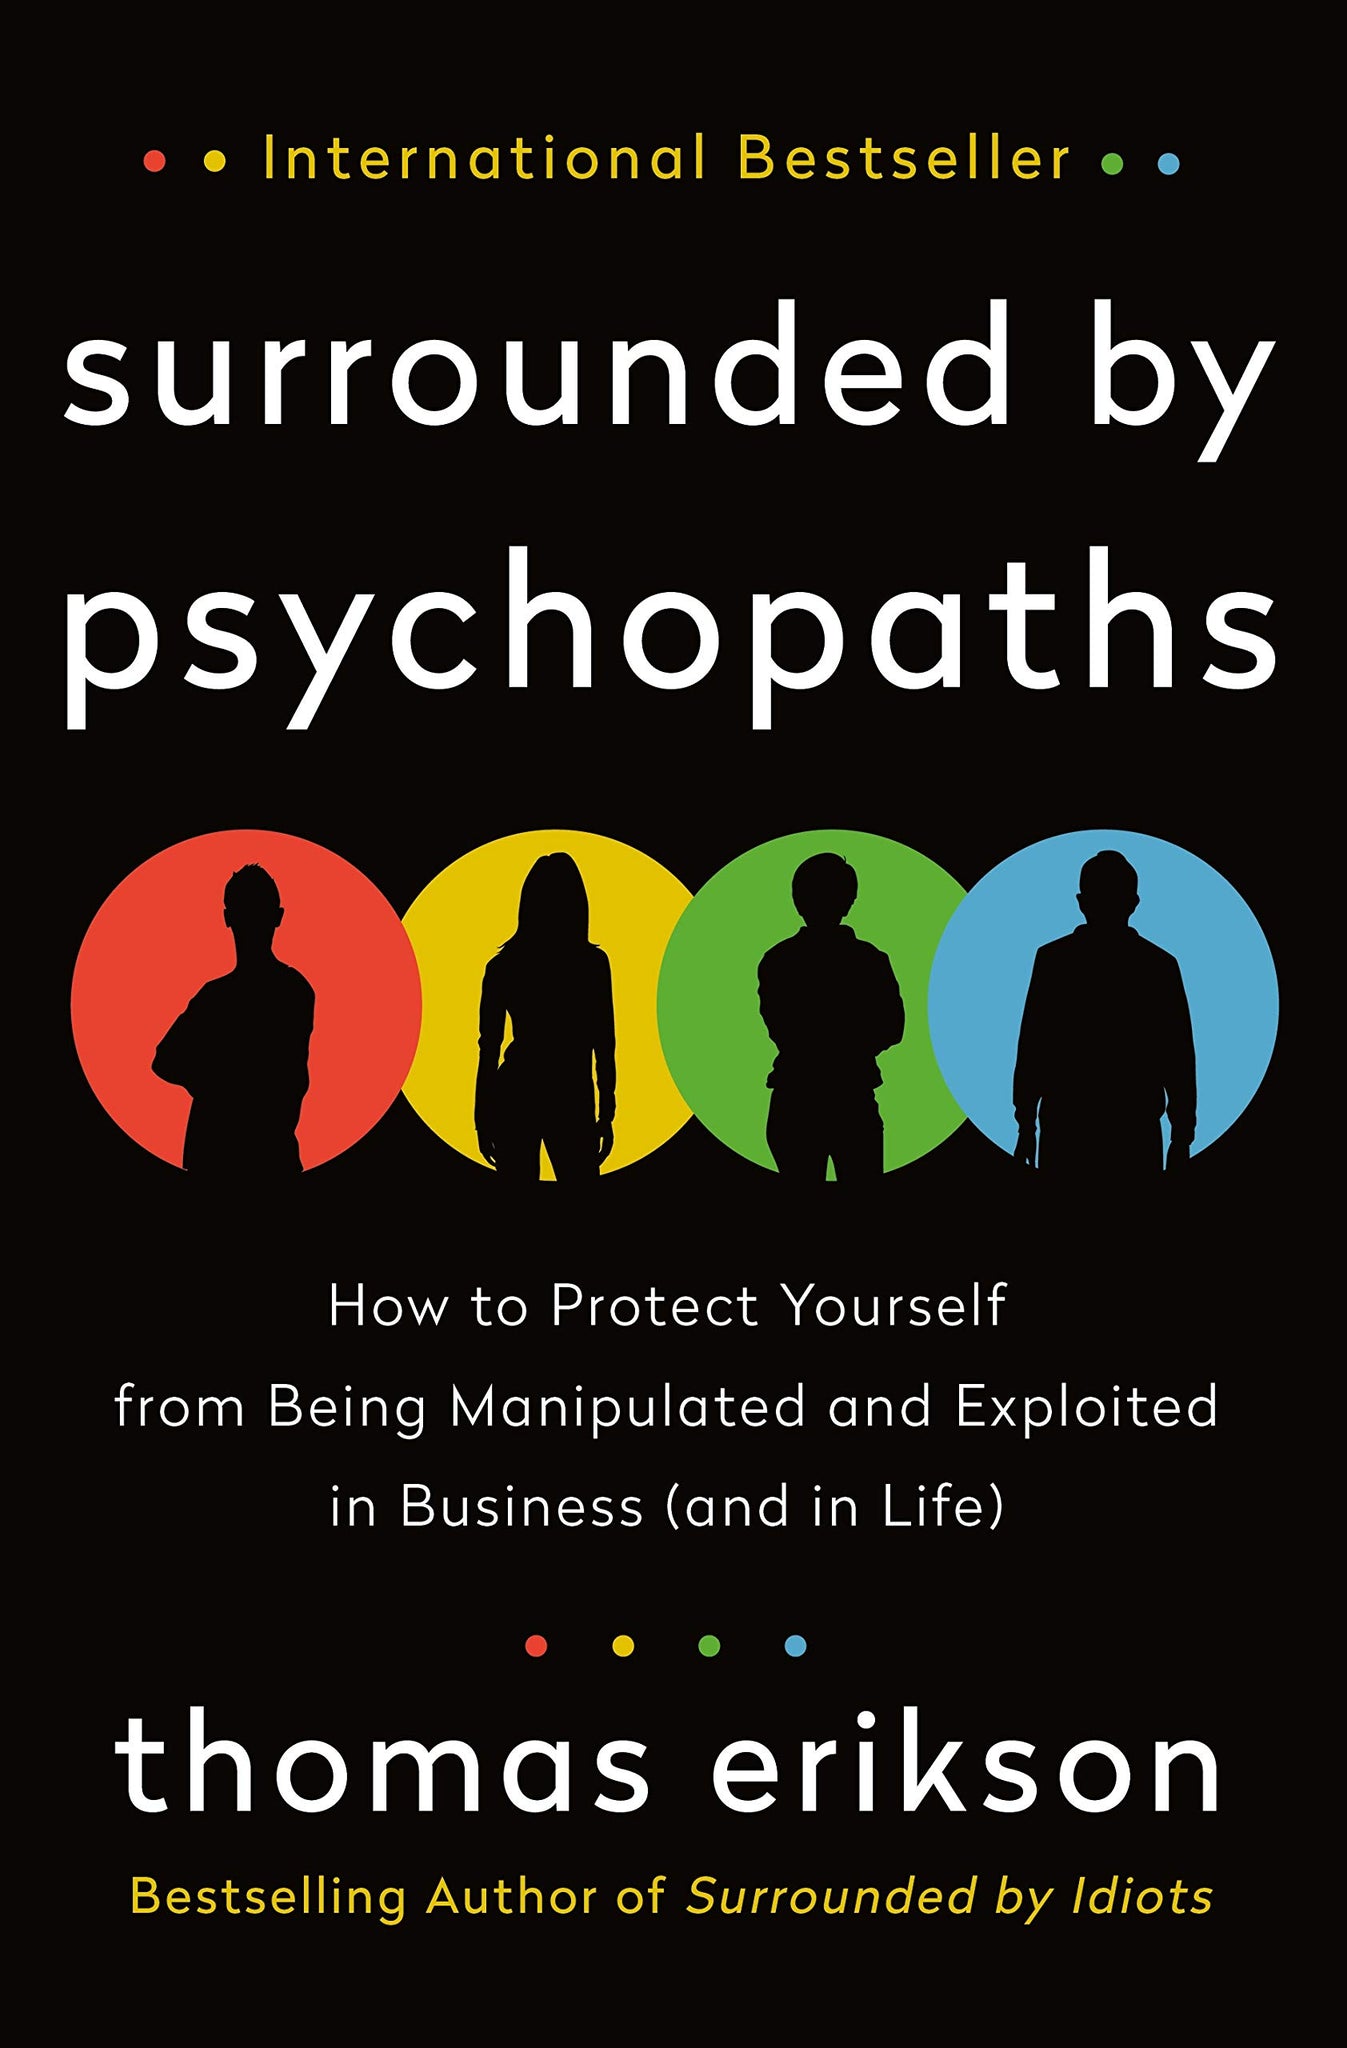 Surrounded by Psychopaths by Thomas Erikson